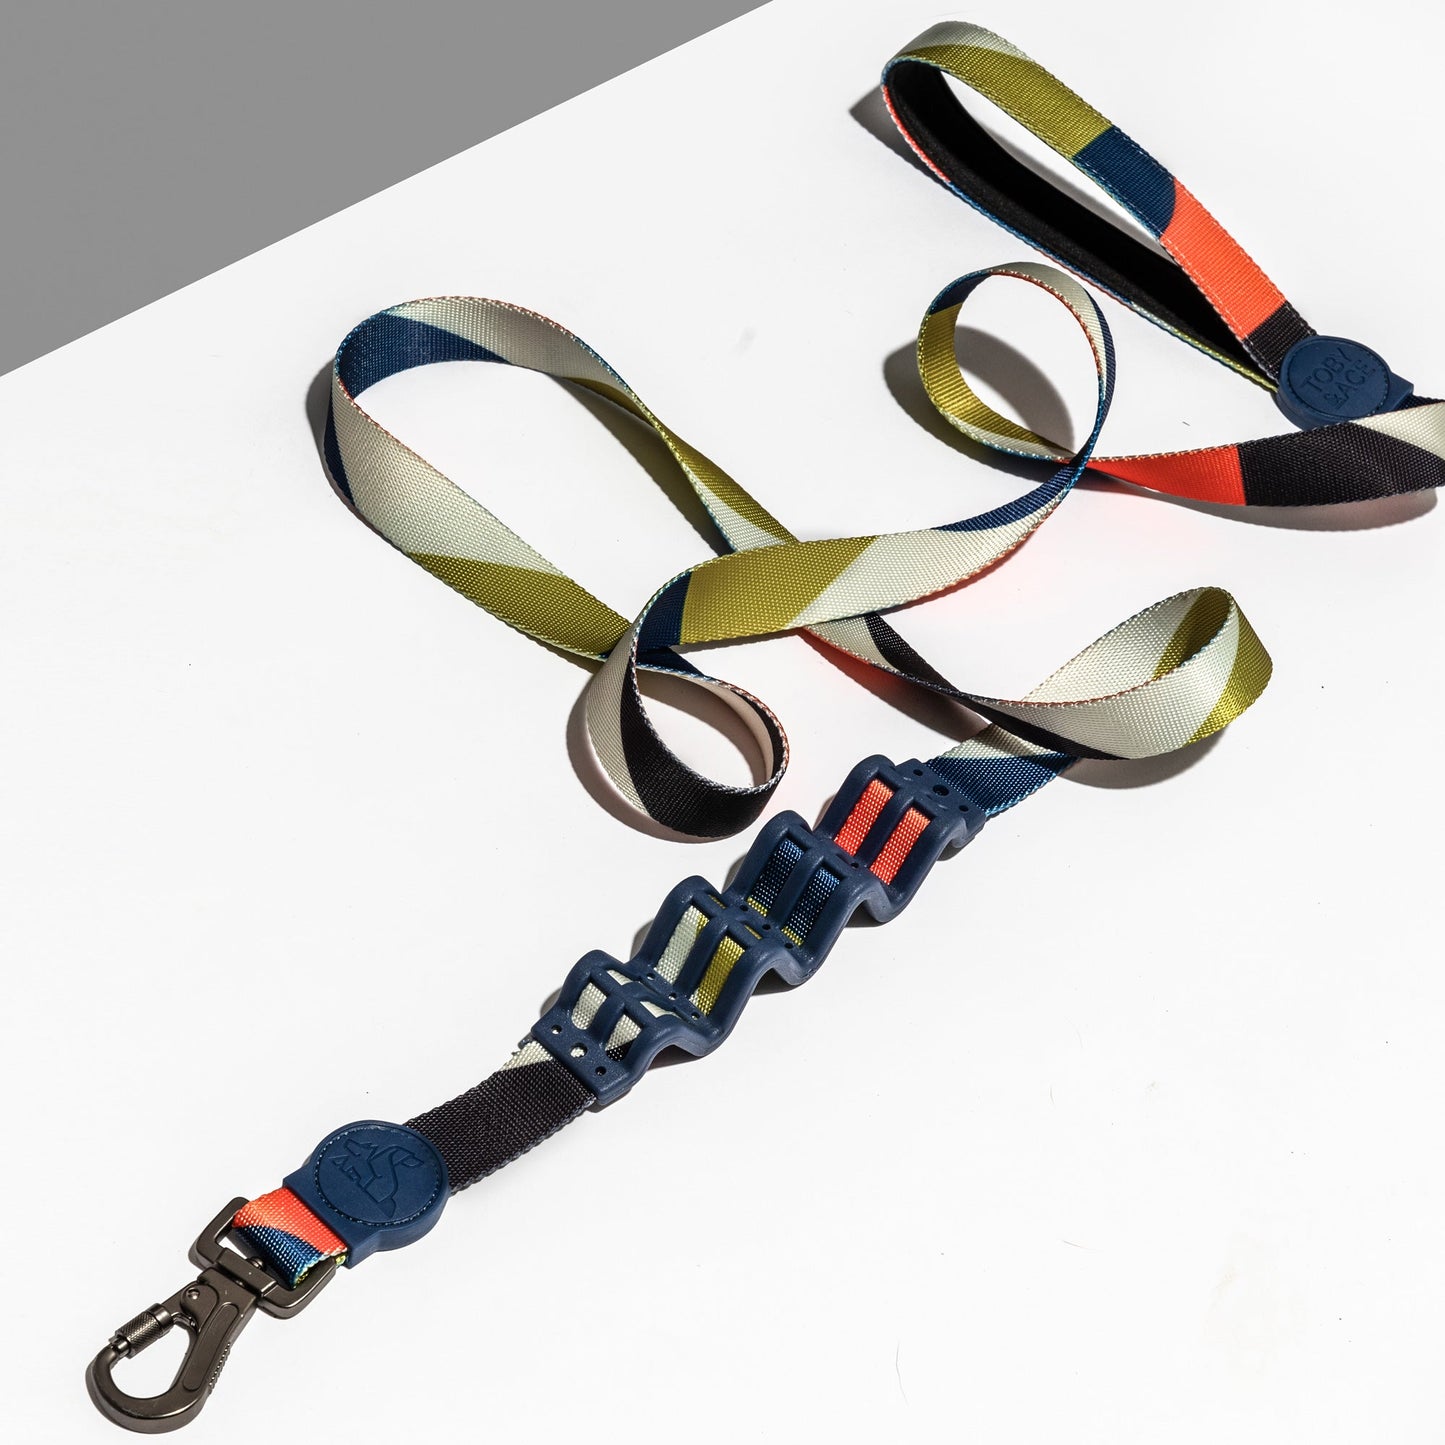 The ZigZag™ Durable Shock Absorbing Leash